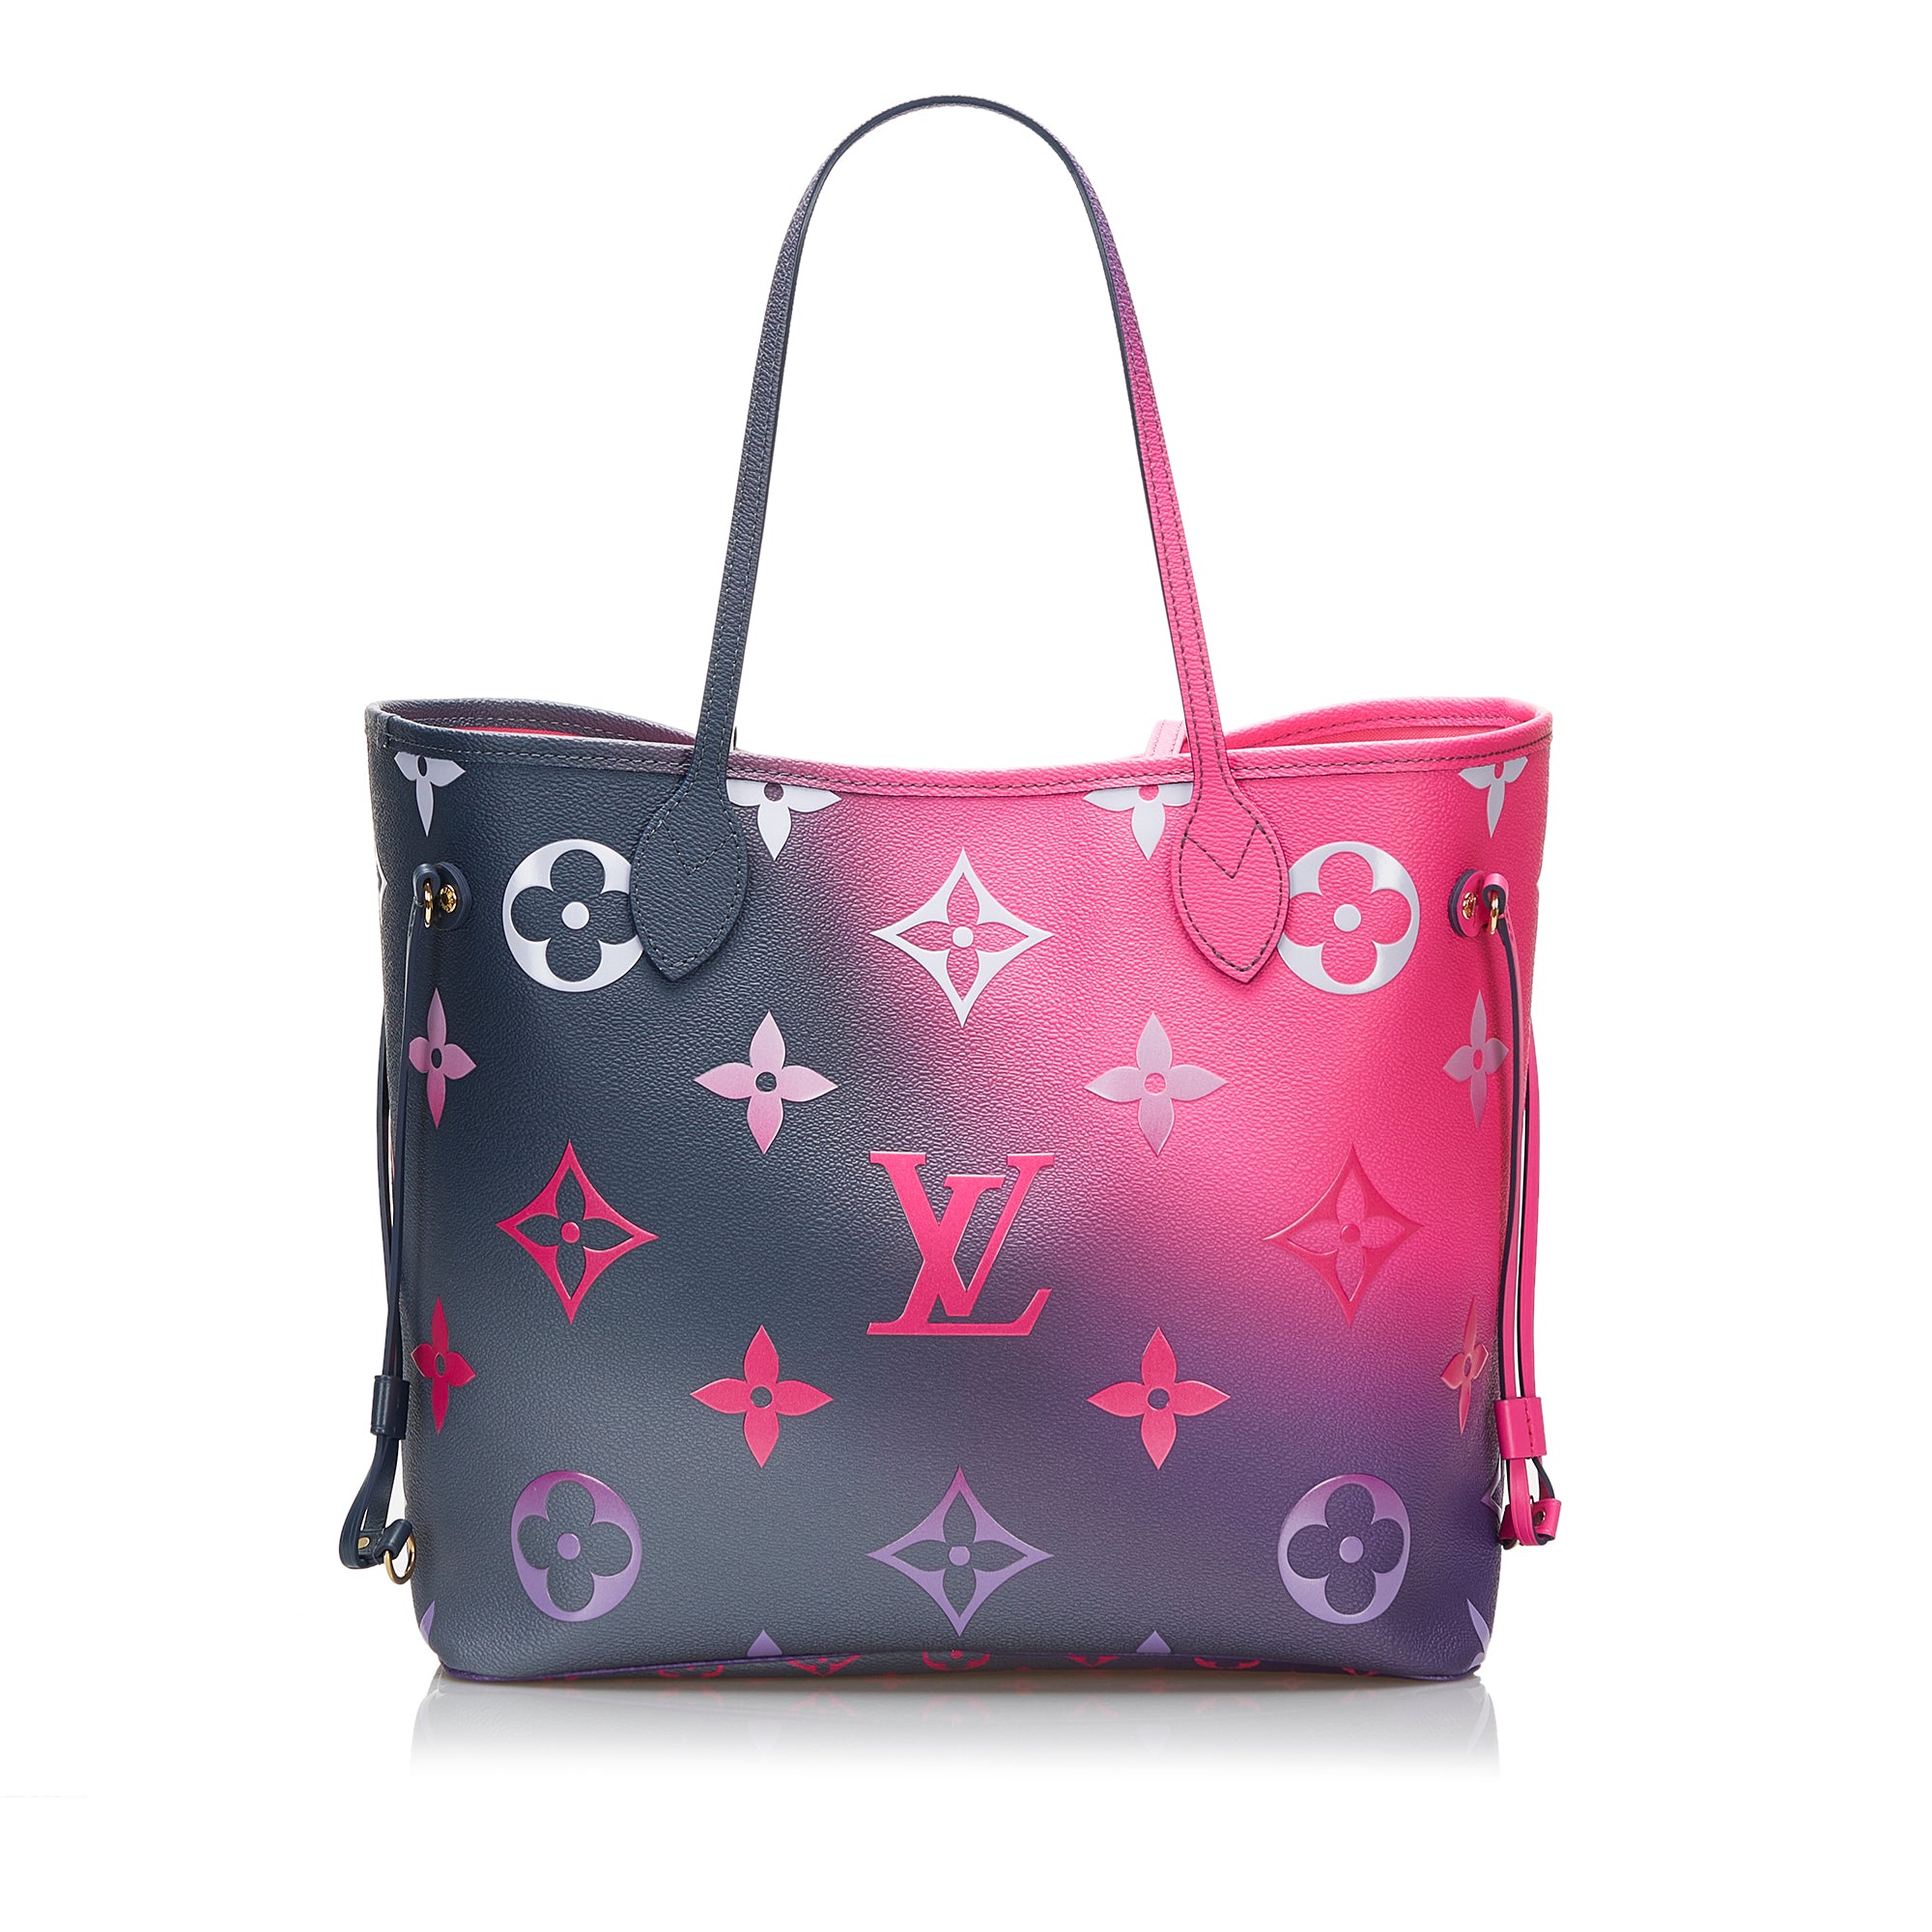 Louis Vuitton Spring in the City Collection: Neverfull Midnight Fuchsia 